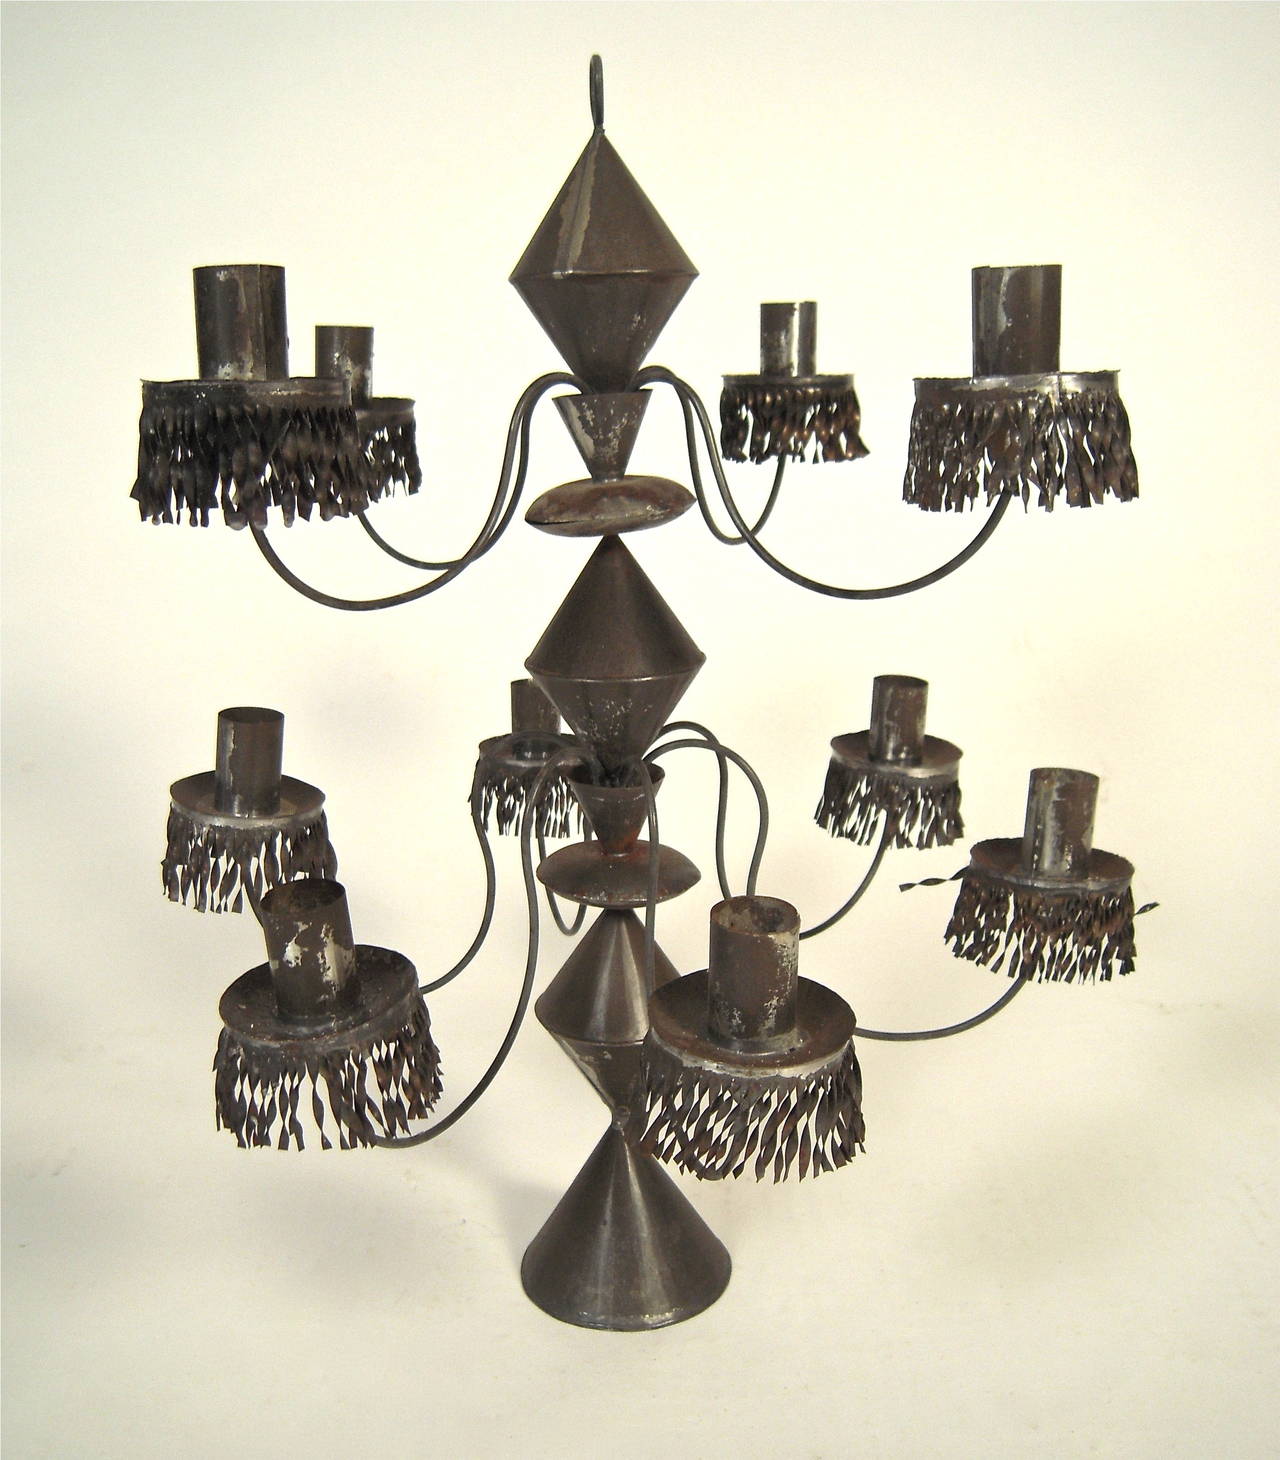 A pair of Mexican ten-light tin candelabra, each with conical bases, the bobeches for each candle decorated with finely cut and twisted tin fringe.
Each candelabrum also has a ring holder on top for hanging. This pair was purchased in Mexico in the